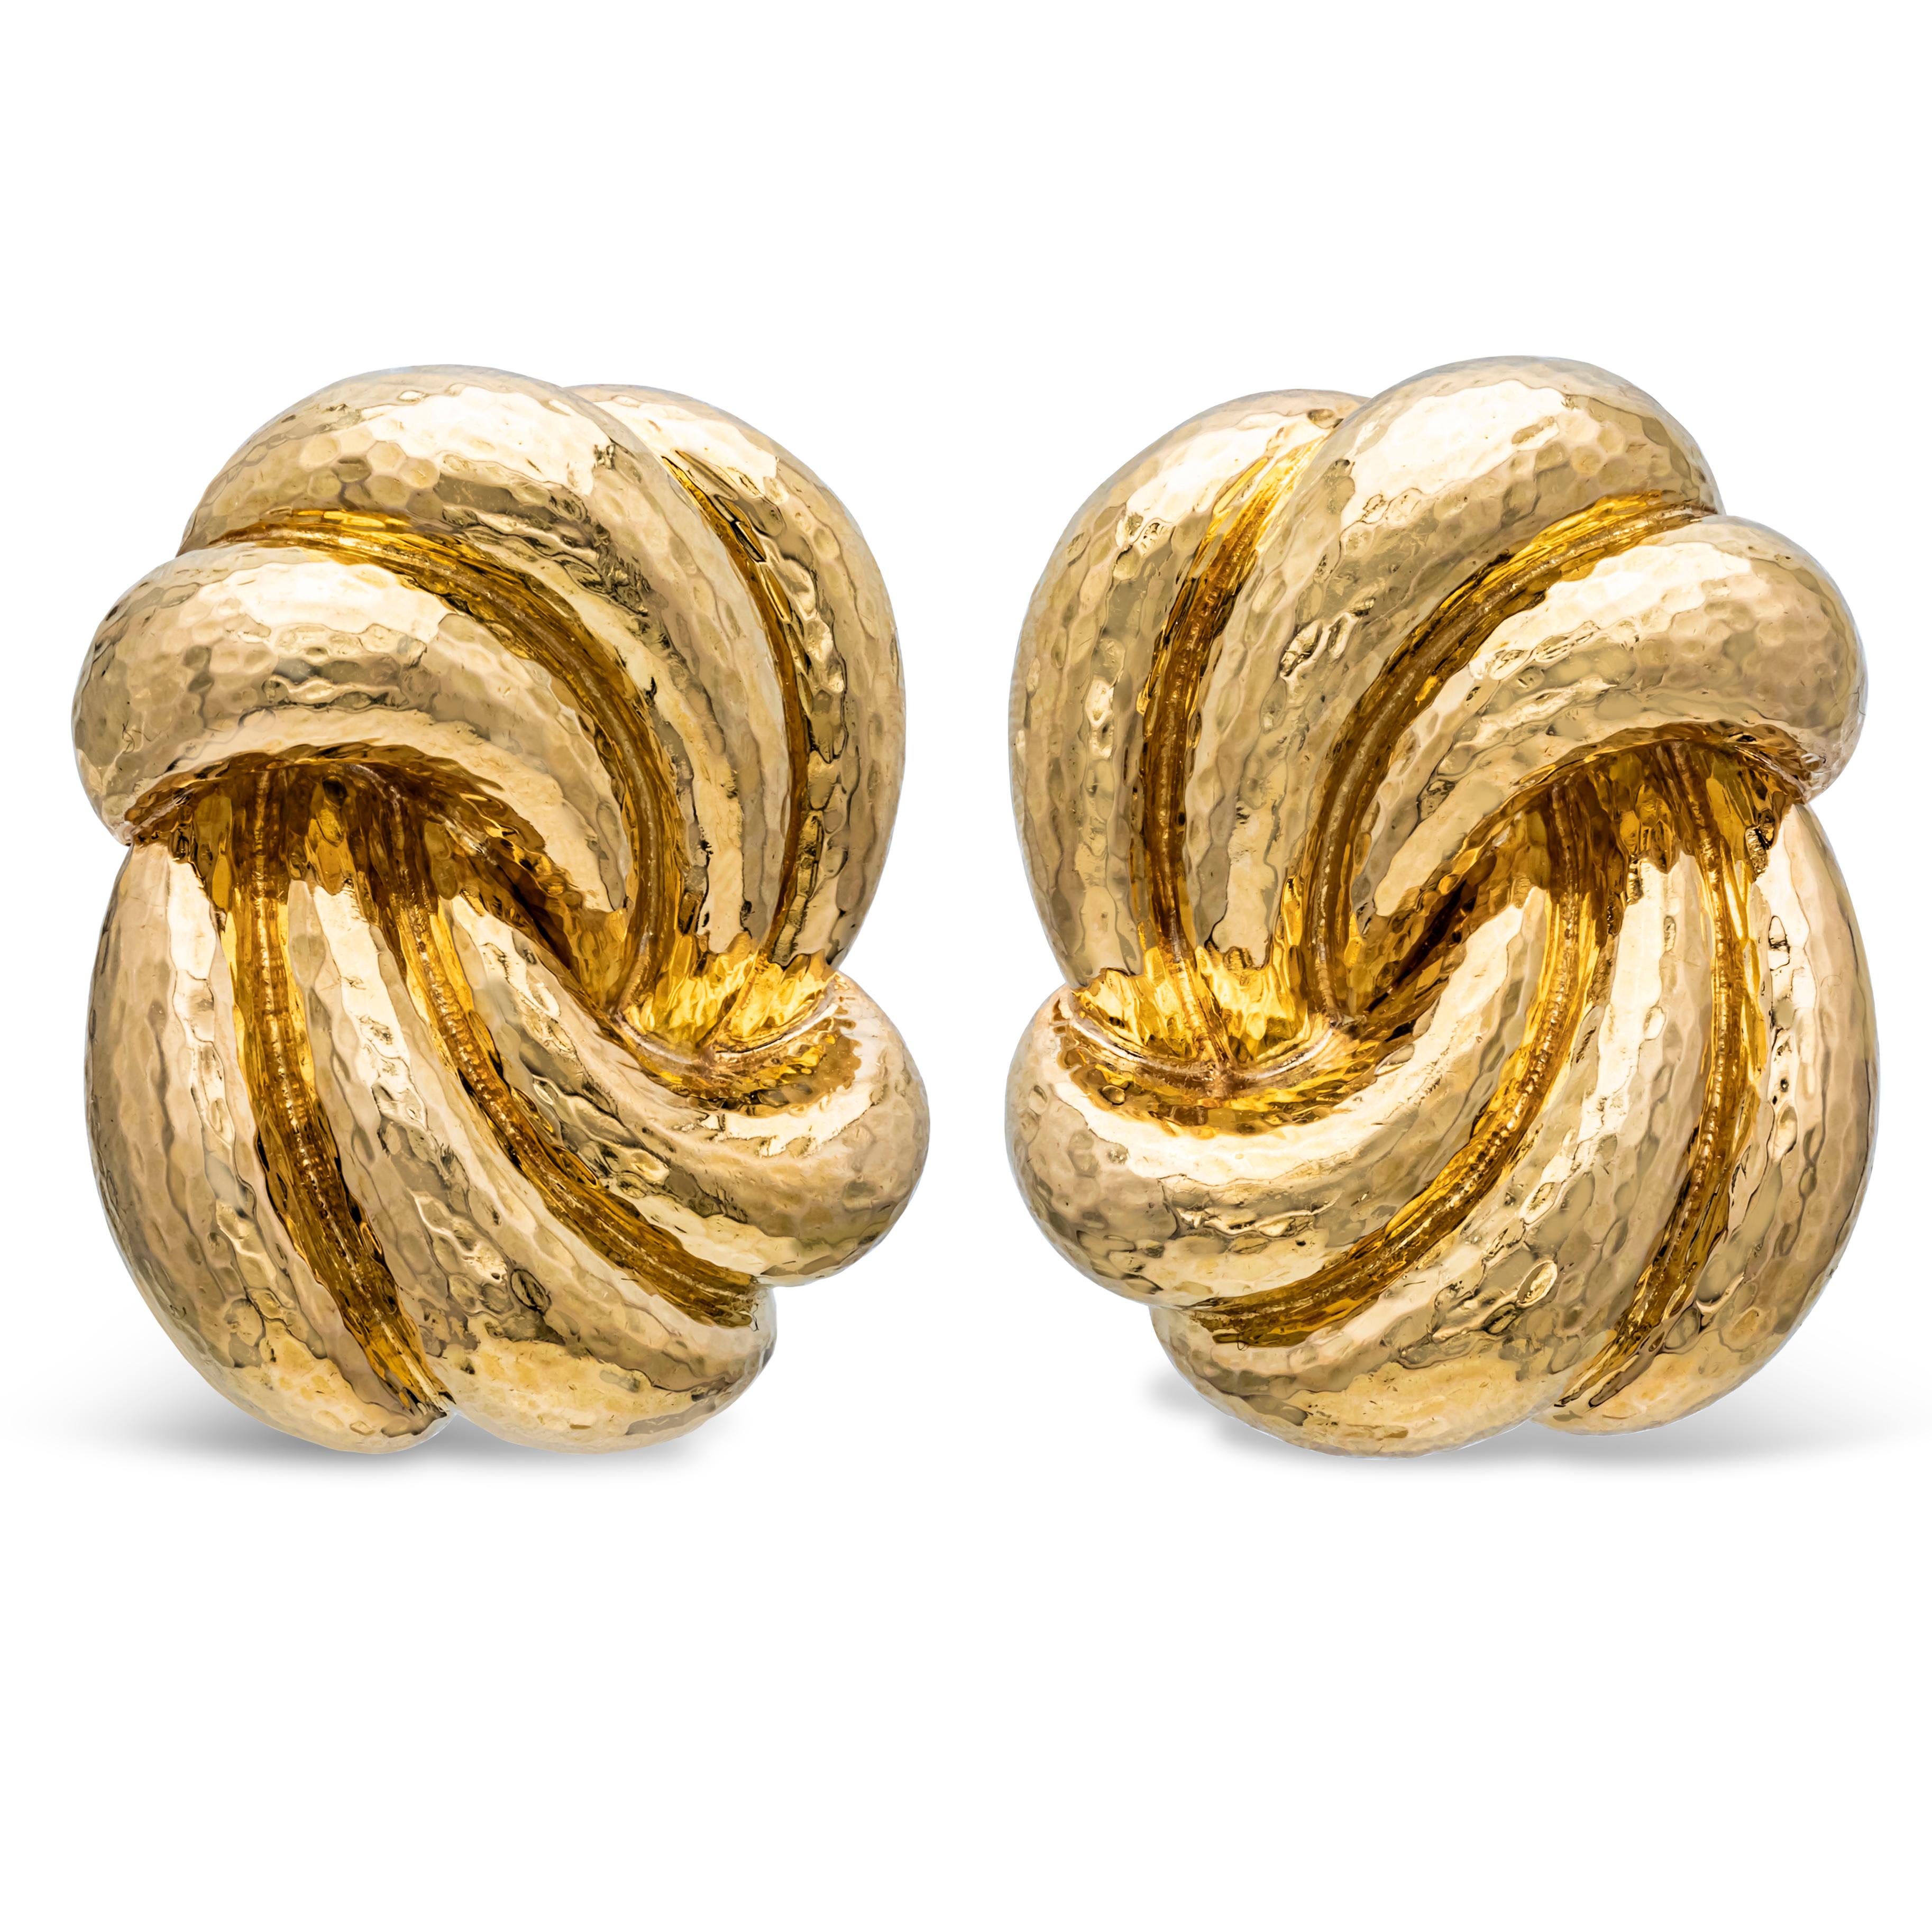 A stunning pair of David Webb earrings, featuring large 18K yellow gold knots with a hammered finish design. Created during the mid-20th century, these ear clips weigh a substantial 41.78 grams and measure 1.3 inches in length, 1 inch in width, and